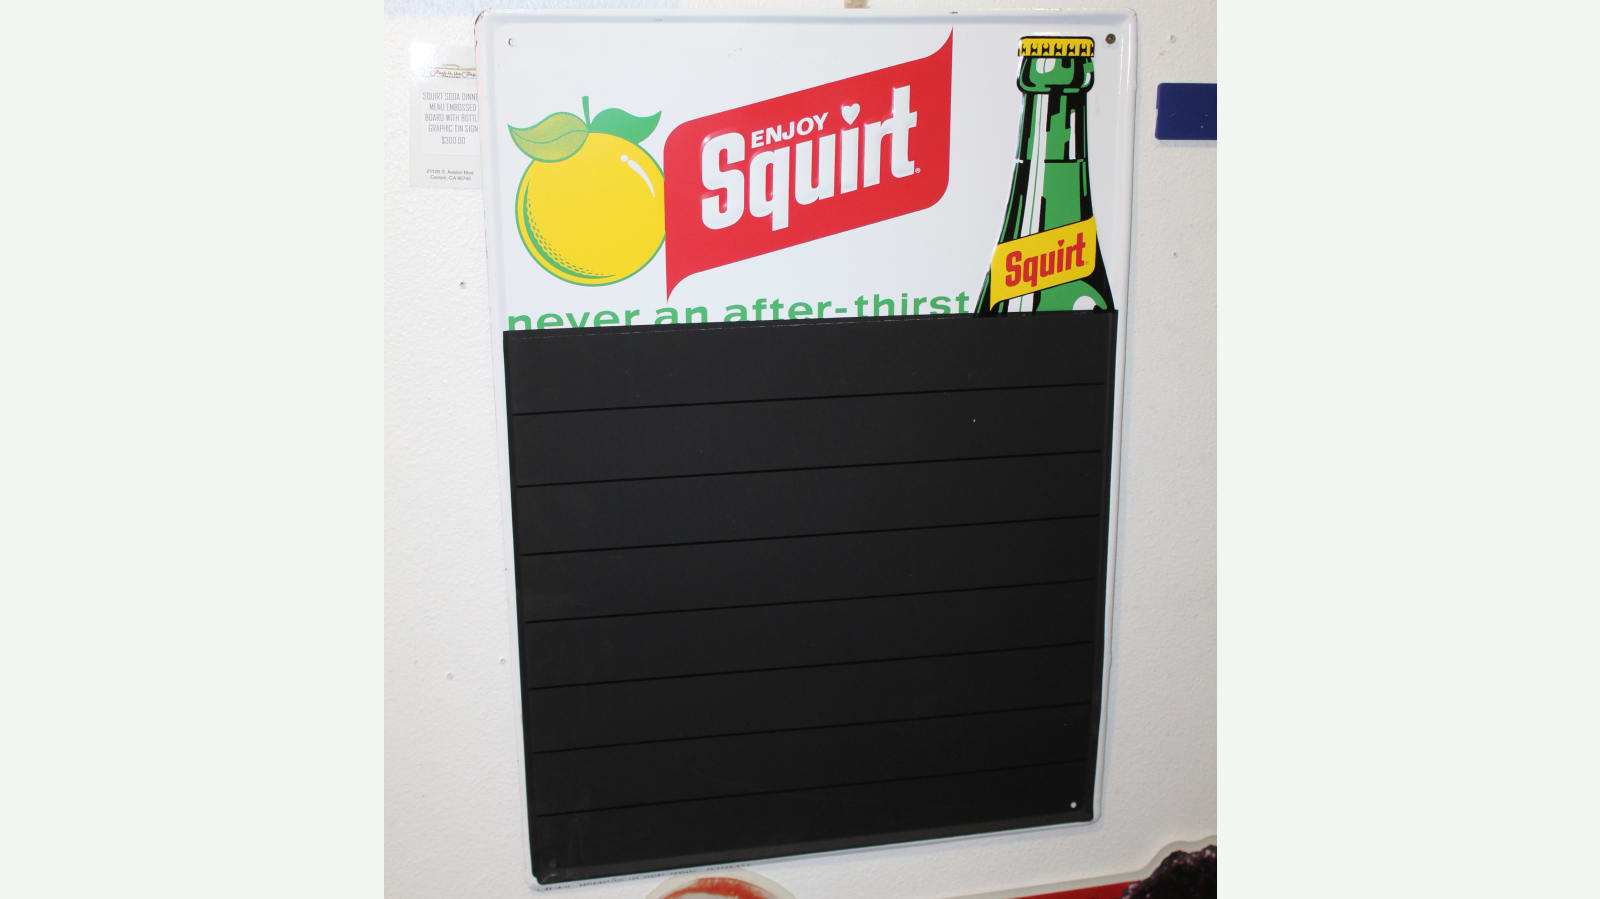 Squirt Soda Dinner Menu Embossed Tin Board Sign At Los Angeles 2017 As